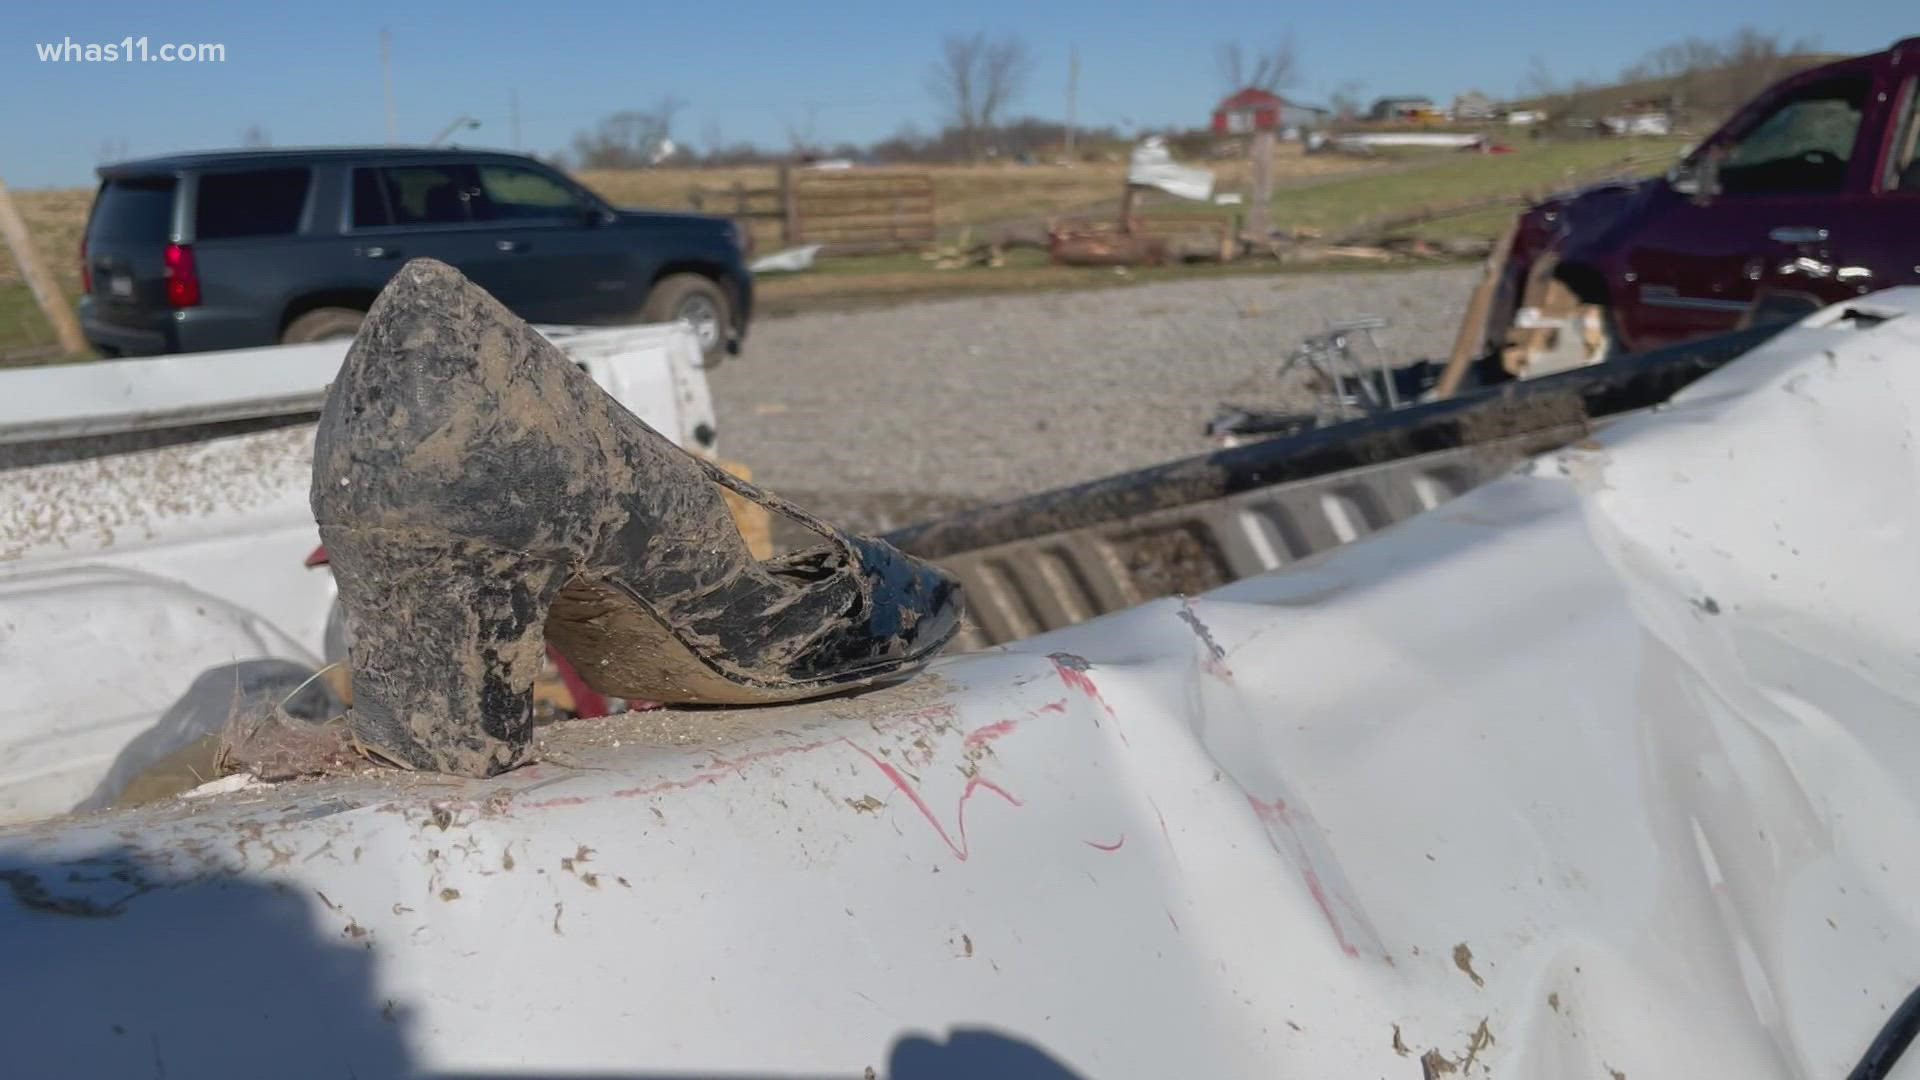 Residents in Taylor County, Kentucky, near the small town of Saloma, save what little possessions weren't destroyed in the Dec. 11 tornado.